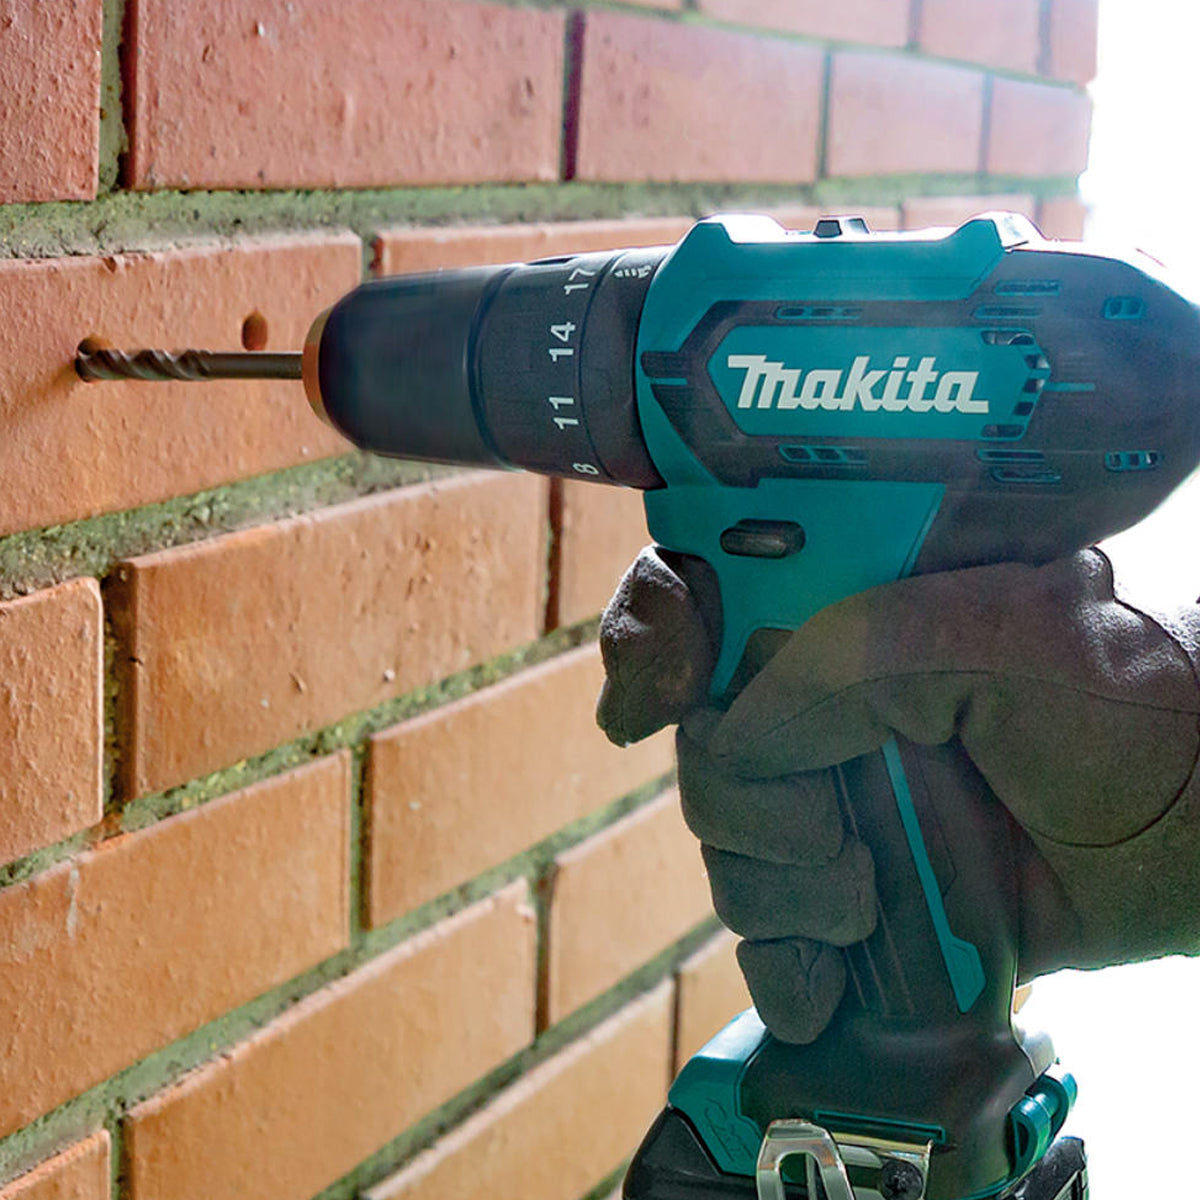 Makita CLX228AJ 12V Max CXT 2 Piece Cordless Kit With 2 x 2.0Ah Batteries & Charger In Case